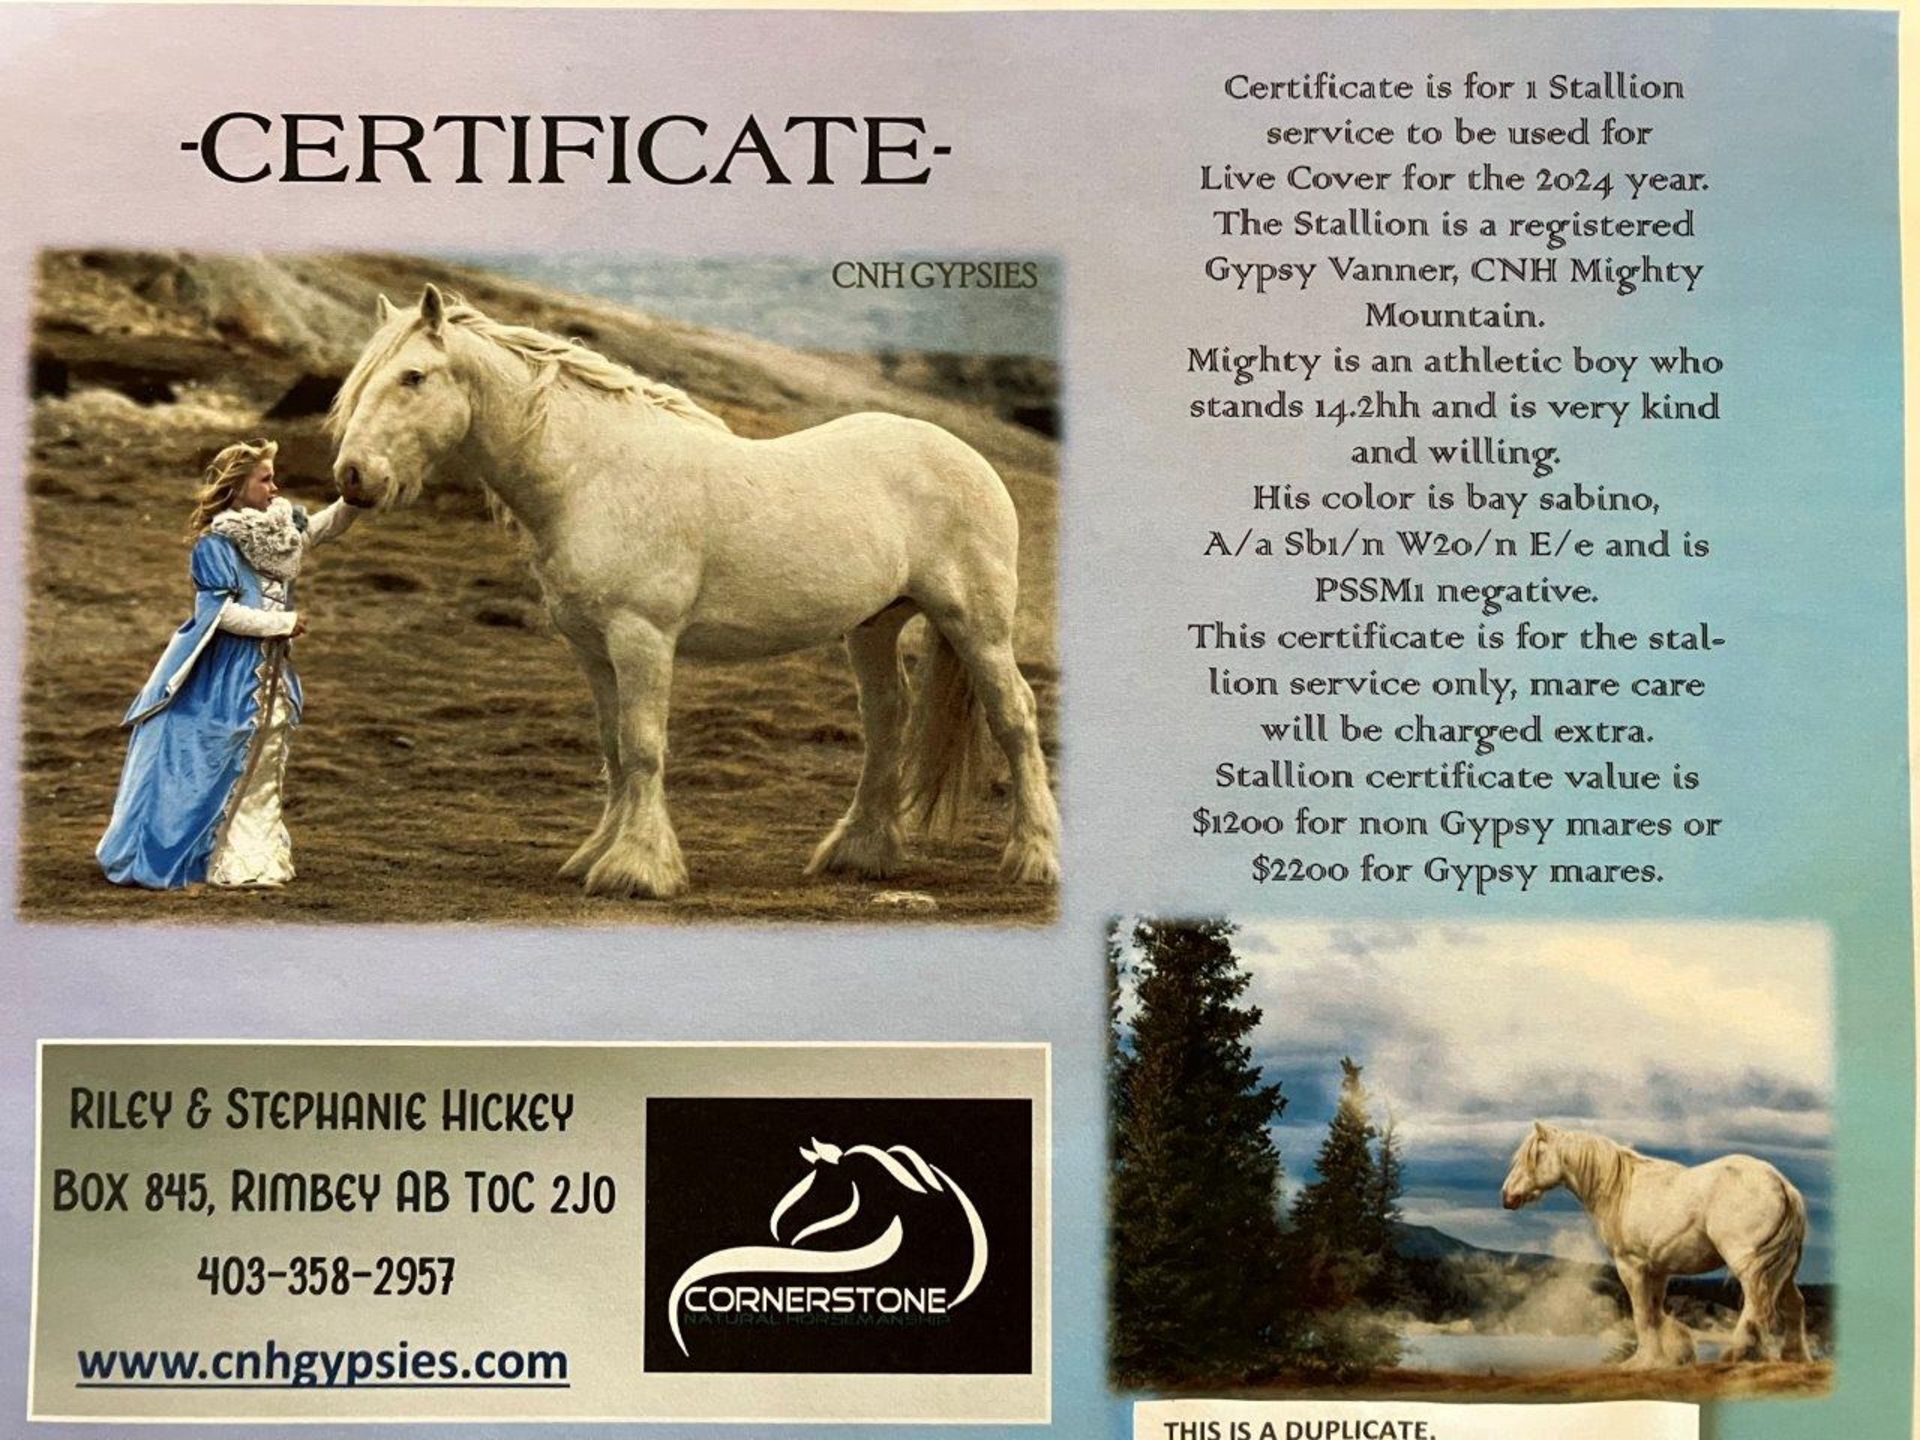 CNH GIFT CERTIFICATE FOR 1 GYPSY STALLION SERVICE (LIVE COVER ) - Image 2 of 3